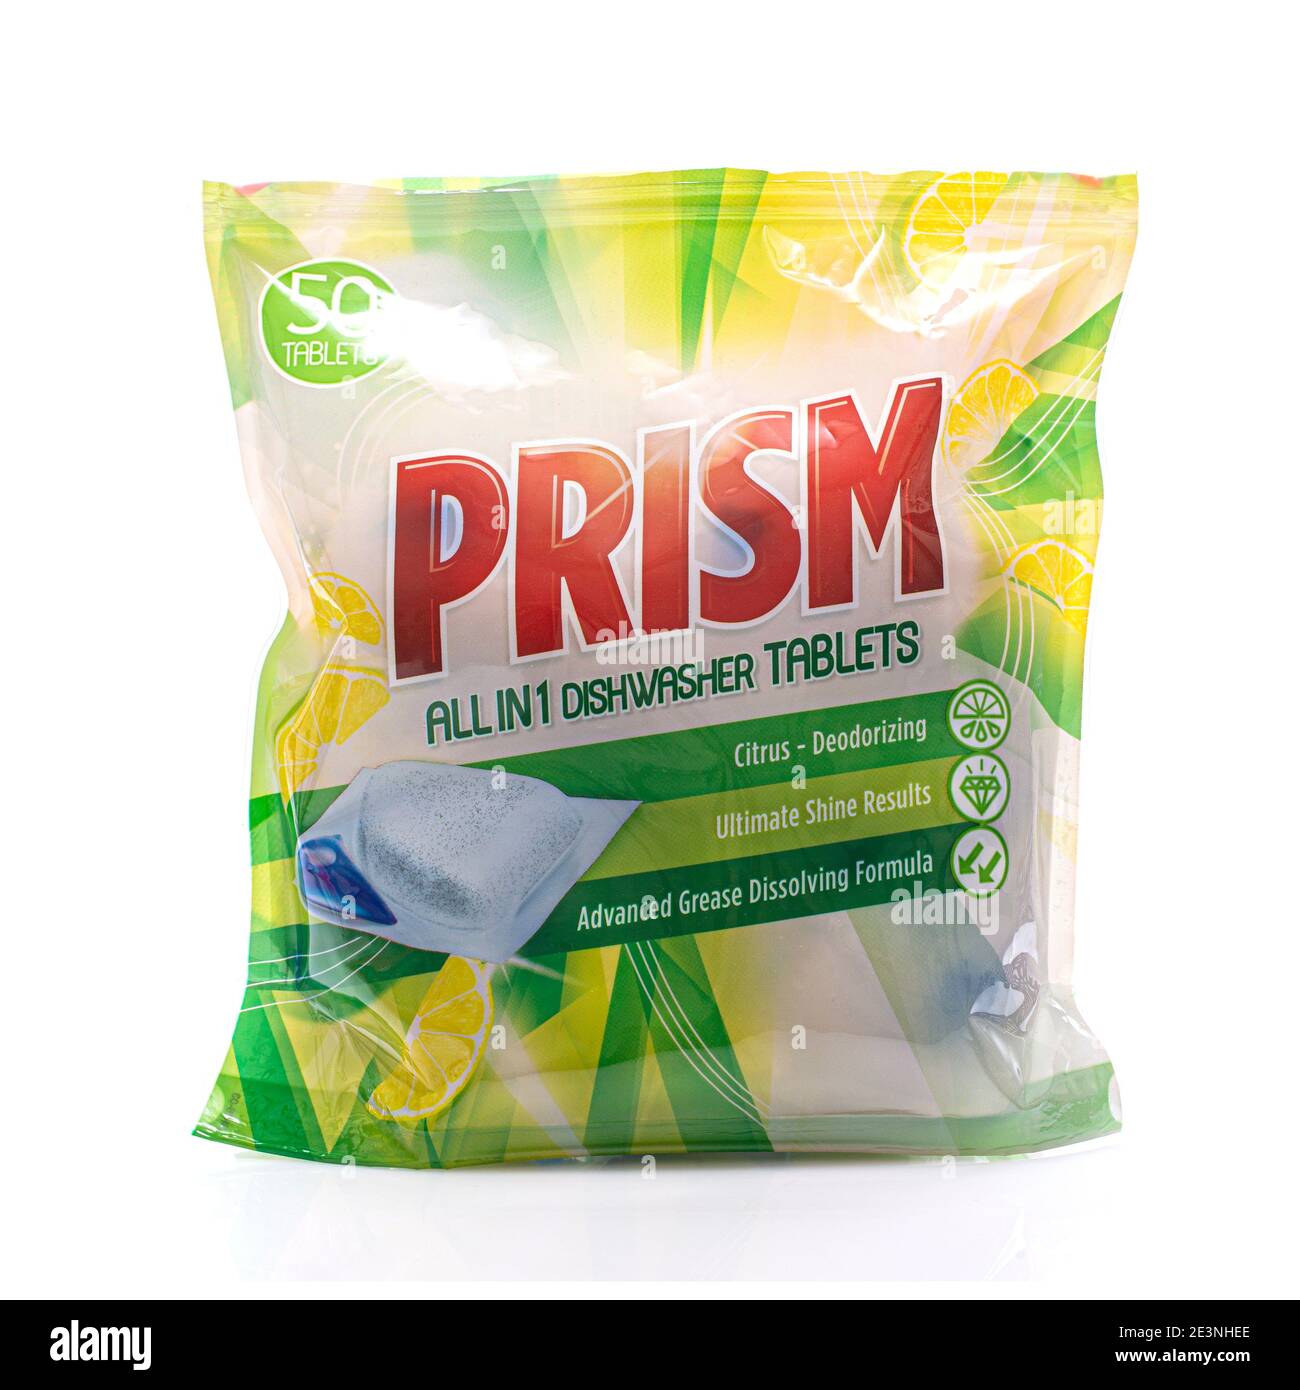 SWINDON, UK - JANUARY 20, 2021:  Packet of Prism all in one dishwasher tablets on a white background Stock Photo